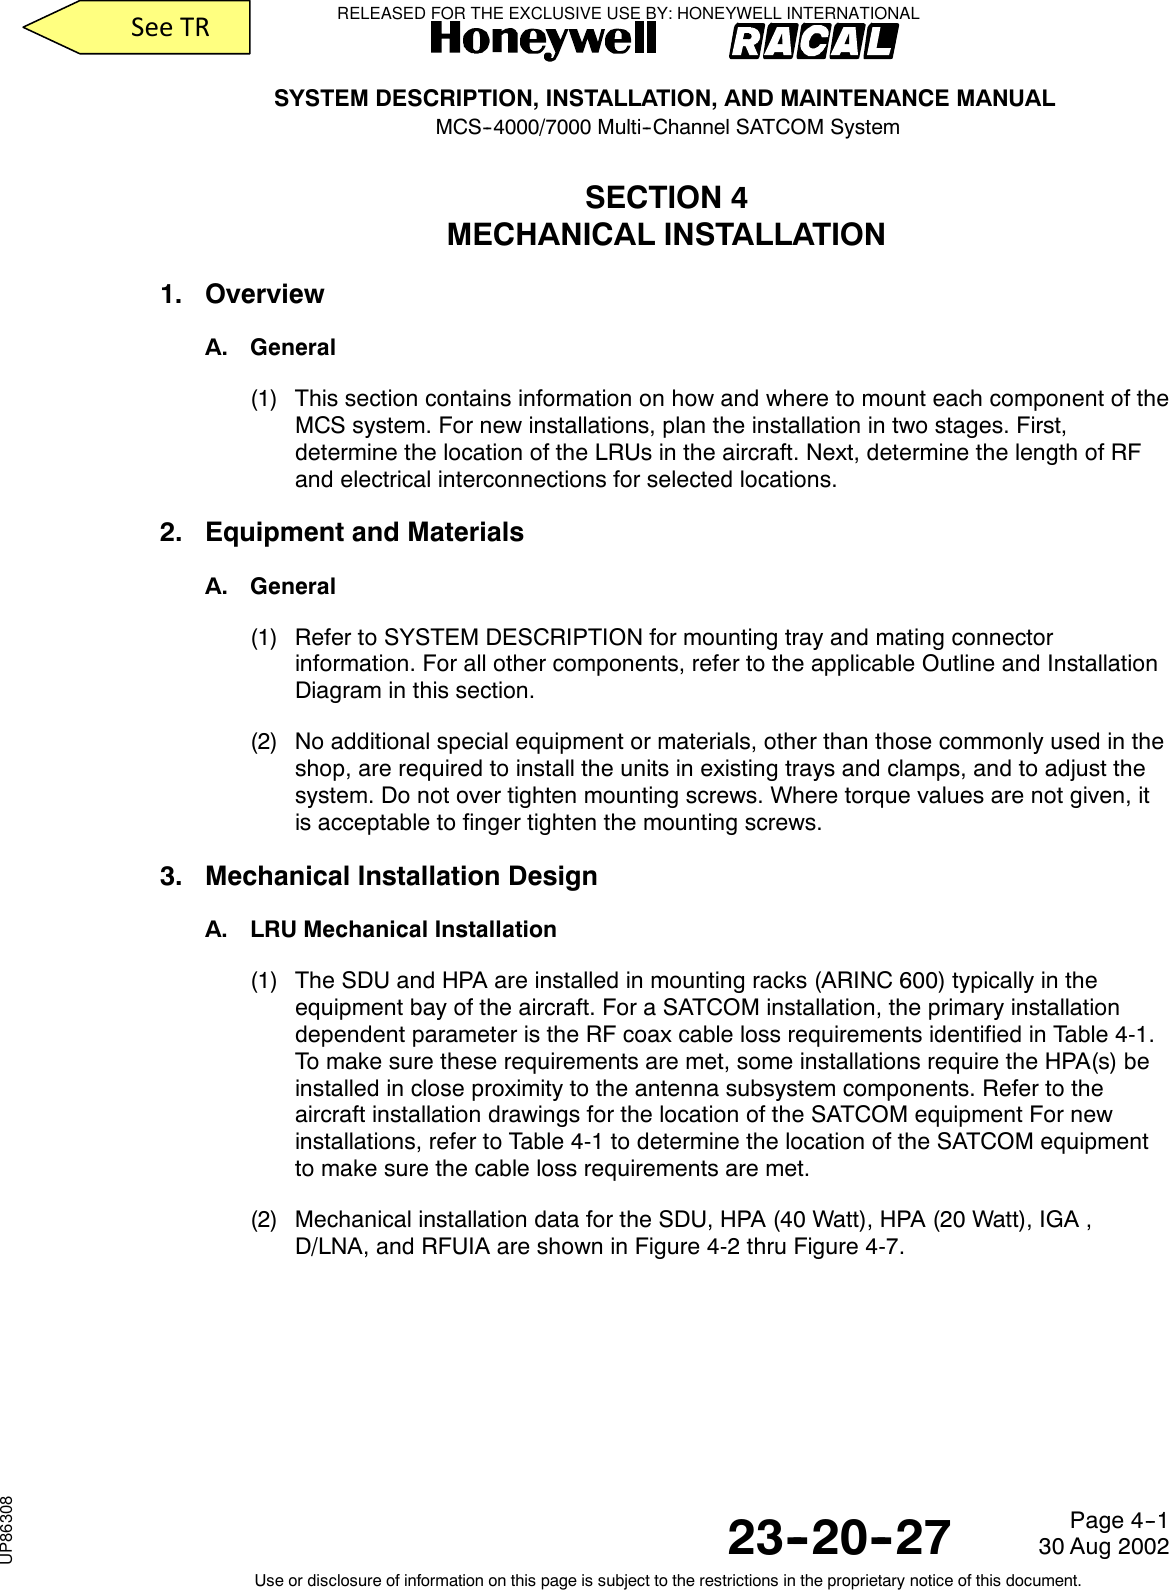 SYSTEM DESCRIPTION, INSTALLATION, AND MAINTENANCE MANUALMCS--4000/7000 Multi--Channel SATCOM System23--20--2730 Aug 2002Use or disclosure of information on this page is subject to the restrictions in the proprietary notice of this document.Page 4--1SECTION 4MECHANICAL INSTALLATION1. OverviewA. General(1) This section contains information on how and where to mount each component of theMCS system. For new installations, plan the installation in two stages. First,determine the location of the LRUs in the aircraft. Next, determine the length of RFand electrical interconnections for selected locations.2. Equipment and MaterialsA. General(1) Refer to SYSTEM DESCRIPTION for mounting tray and mating connectorinformation. For all other components, refer to the applicable Outline and InstallationDiagram in this section.(2) No additional special equipment or materials, other than those commonly used in theshop, are required to install the units in existing trays and clamps, and to adjust thesystem. Do not over tighten mounting screws. Where torque values are not given, itis acceptable to finger tighten the mounting screws.3. Mechanical Installation DesignA. LRU Mechanical Installation(1) The SDU and HPA are installed in mounting racks (ARINC 600) typically in theequipment bay of the aircraft. For a SATCOM installation, the primary installationdependent parameter is the RF coax cable loss requirements identified in Table 4-1.To make sure these requirements are met, some installations require the HPA(s) beinstalled in close proximity to the antenna subsystem components. Refer to theaircraft installation drawings for the location of the SATCOM equipment For newinstallations, refer to Table 4-1 to determine the location of the SATCOM equipmentto make sure the cable loss requirements are met.(2) Mechanical installation data for the SDU, HPA (40 Watt), HPA (20 Watt), IGA ,D/LNA, and RFUIA are shown in Figure 4-2 thru Figure 4-7.RELEASED FOR THE EXCLUSIVE USE BY: HONEYWELL INTERNATIONALUP86308SeeTR